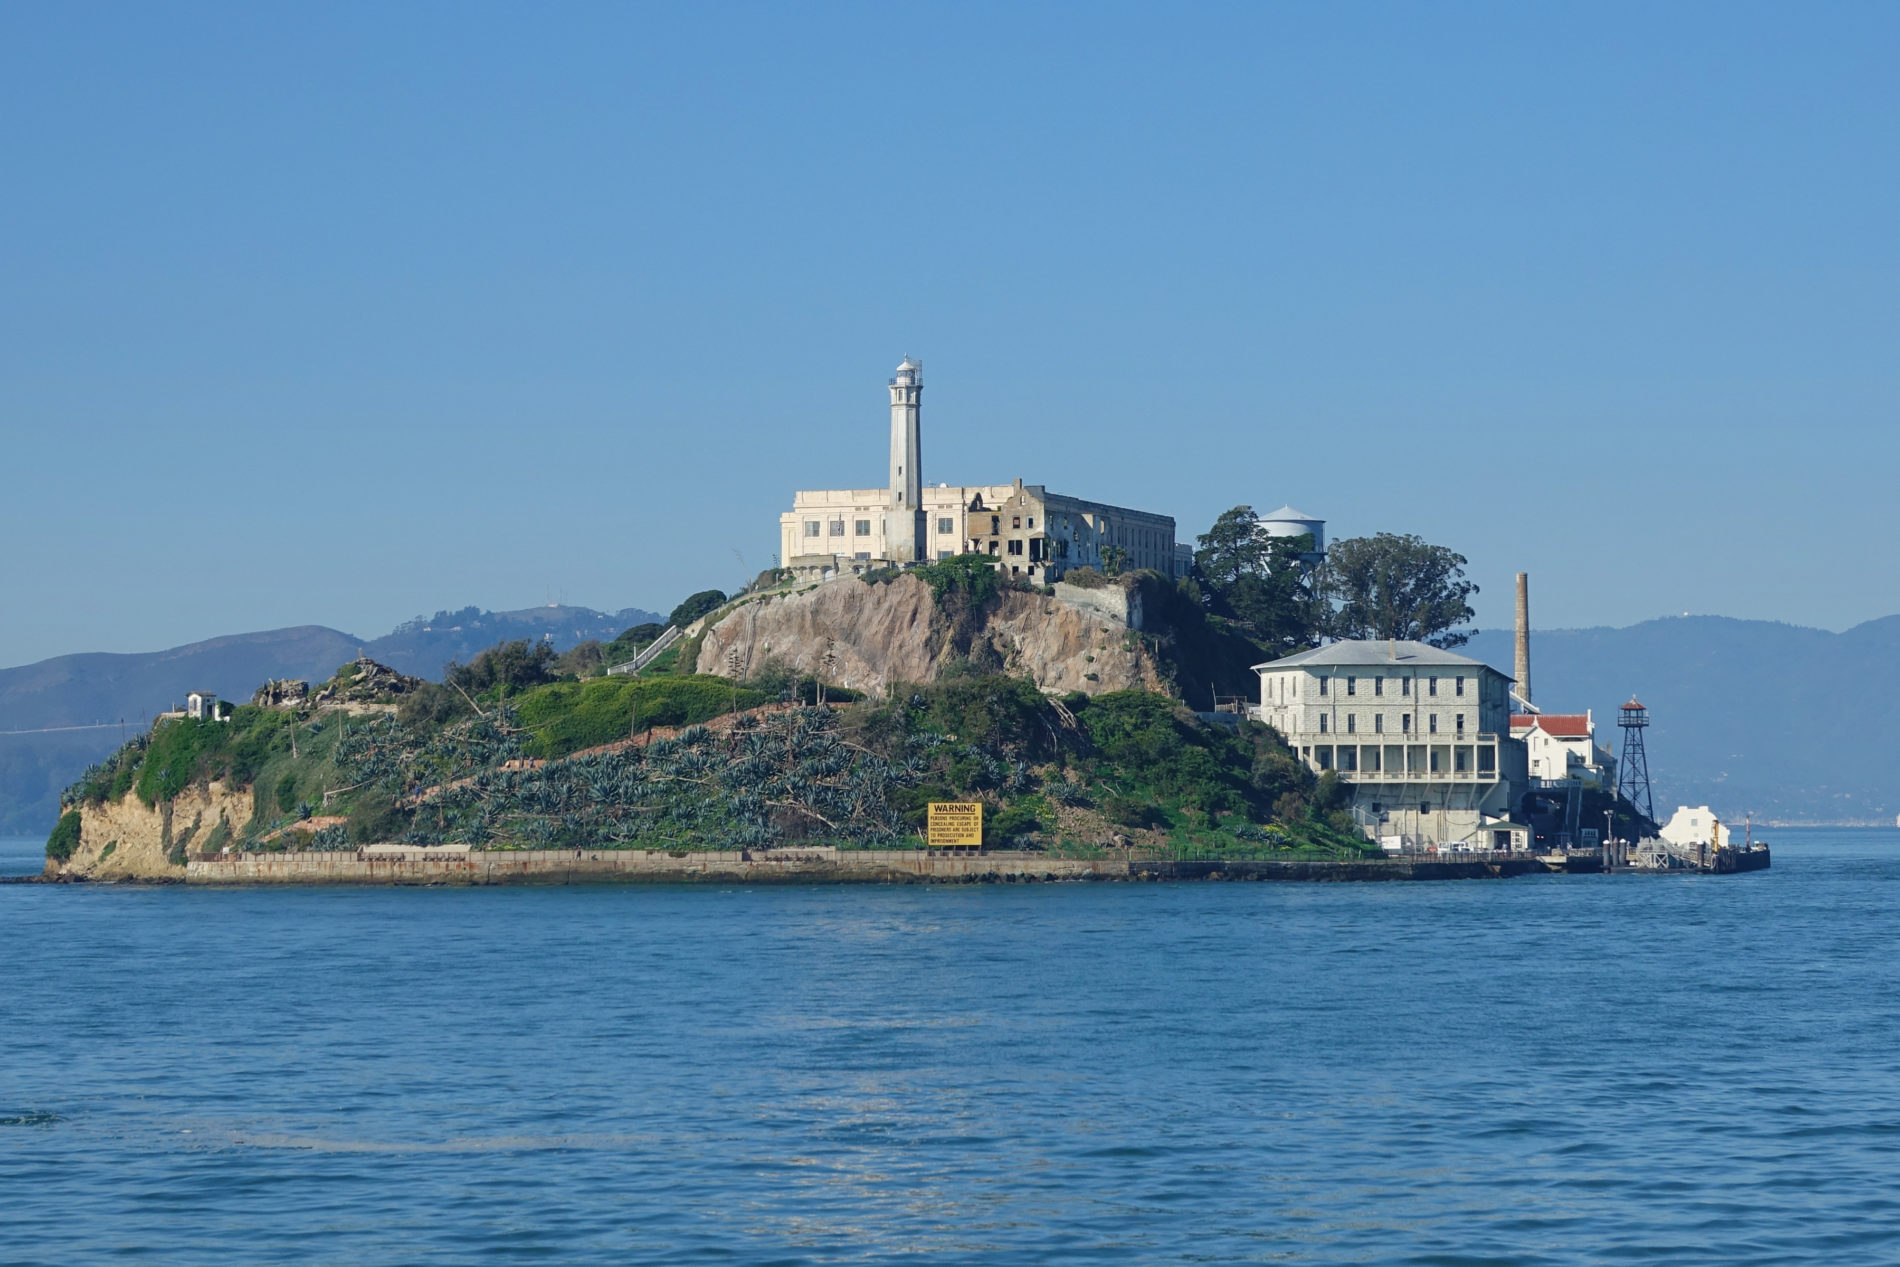 Alcatraz Island crowned with a lighthouse and cellhouse viewed from the Alcatraz Ferry.